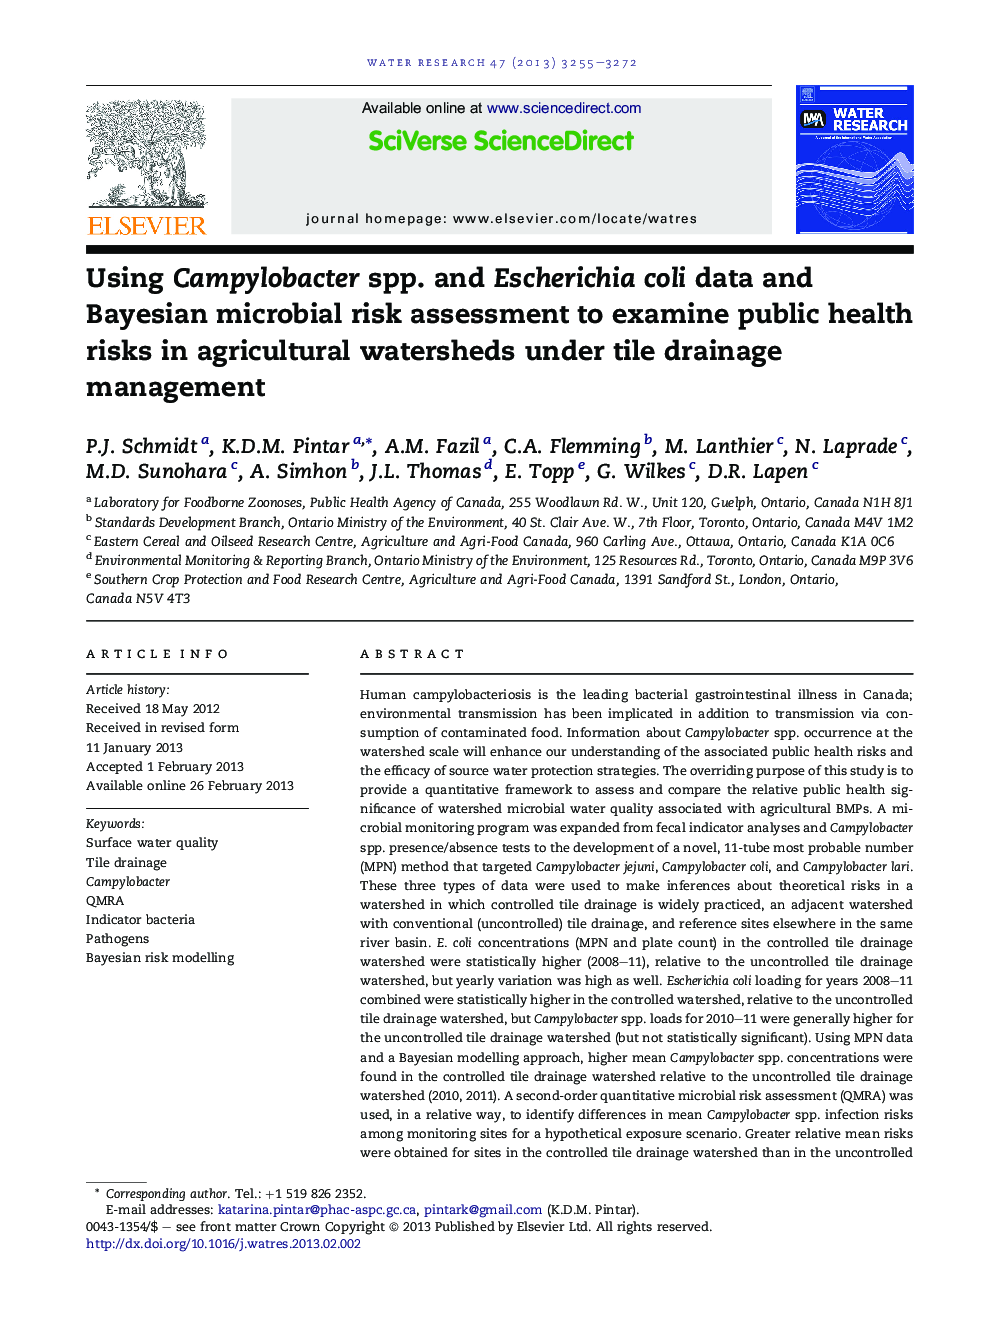 Using Campylobacter spp. and Escherichia coli data and Bayesian microbial risk assessment to examine public health risks in agricultural watersheds under tile drainage management